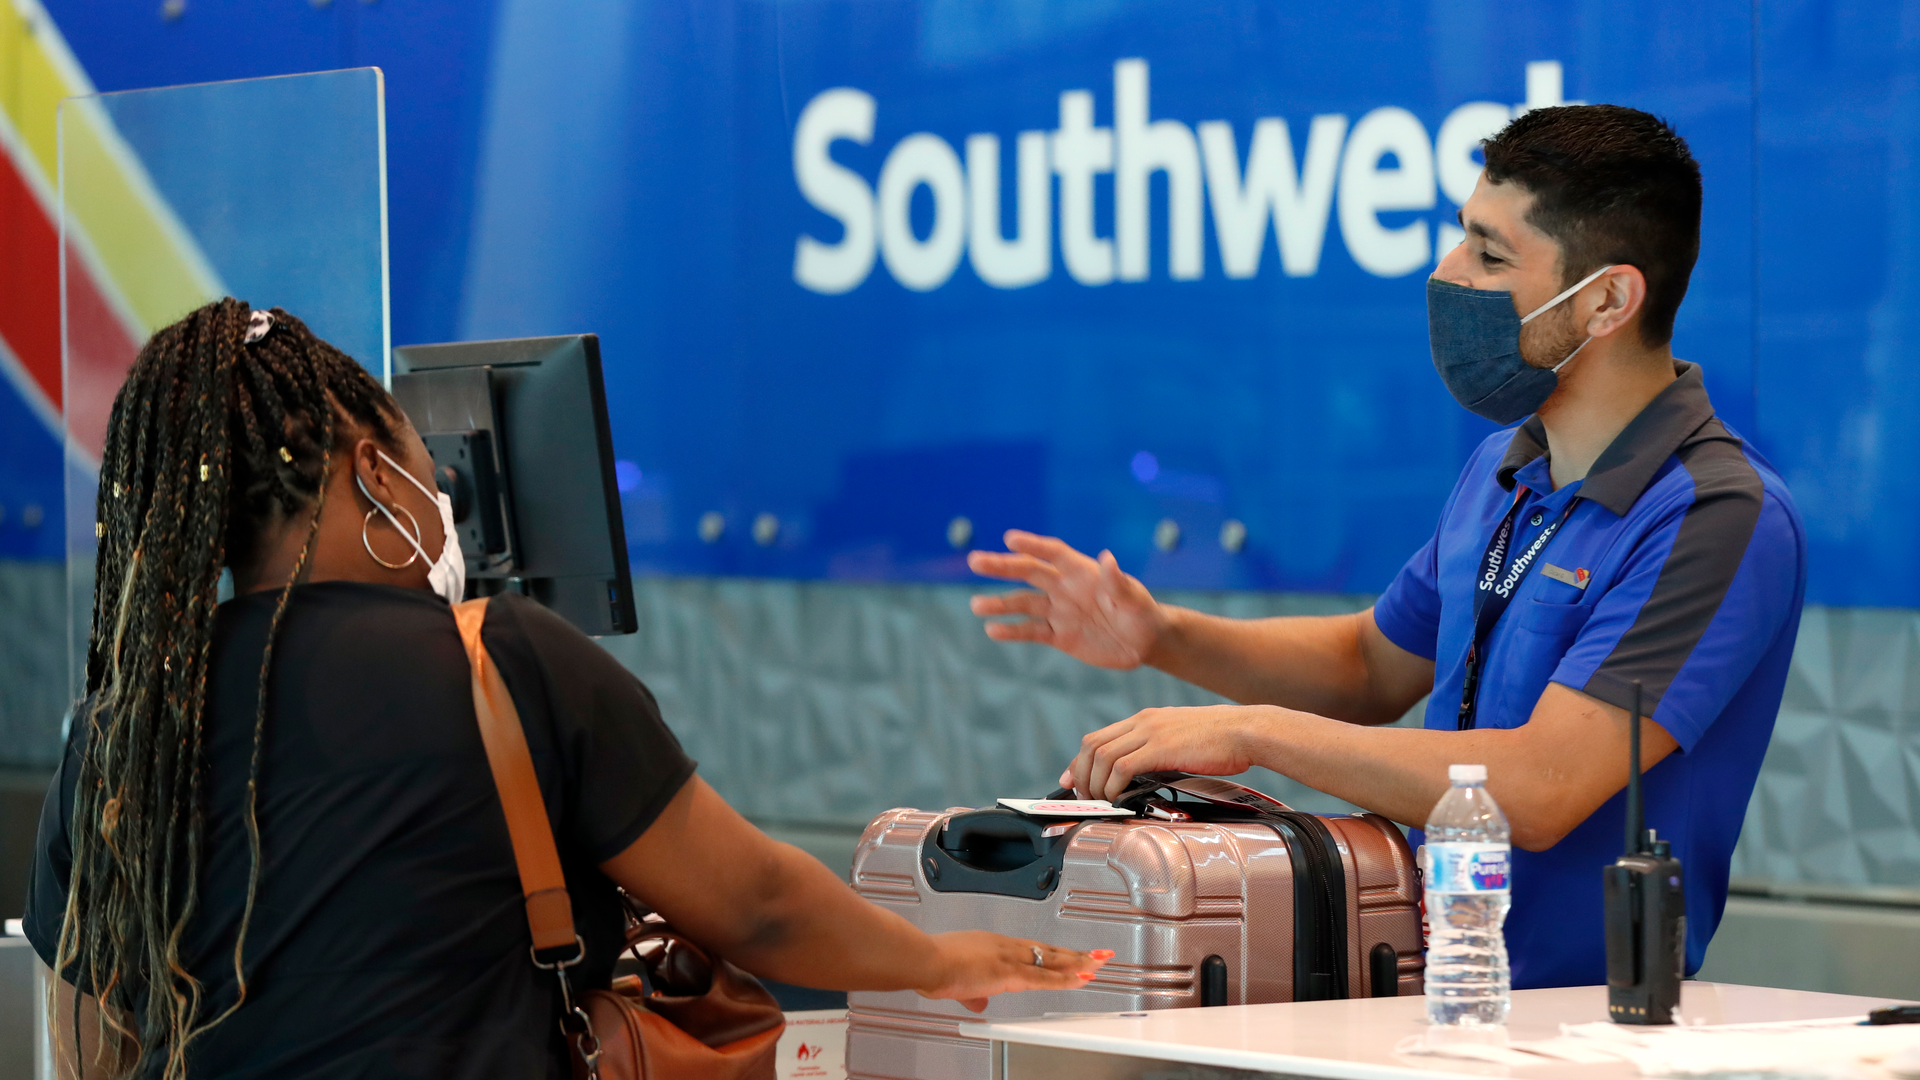 southwest airlines customer service agent